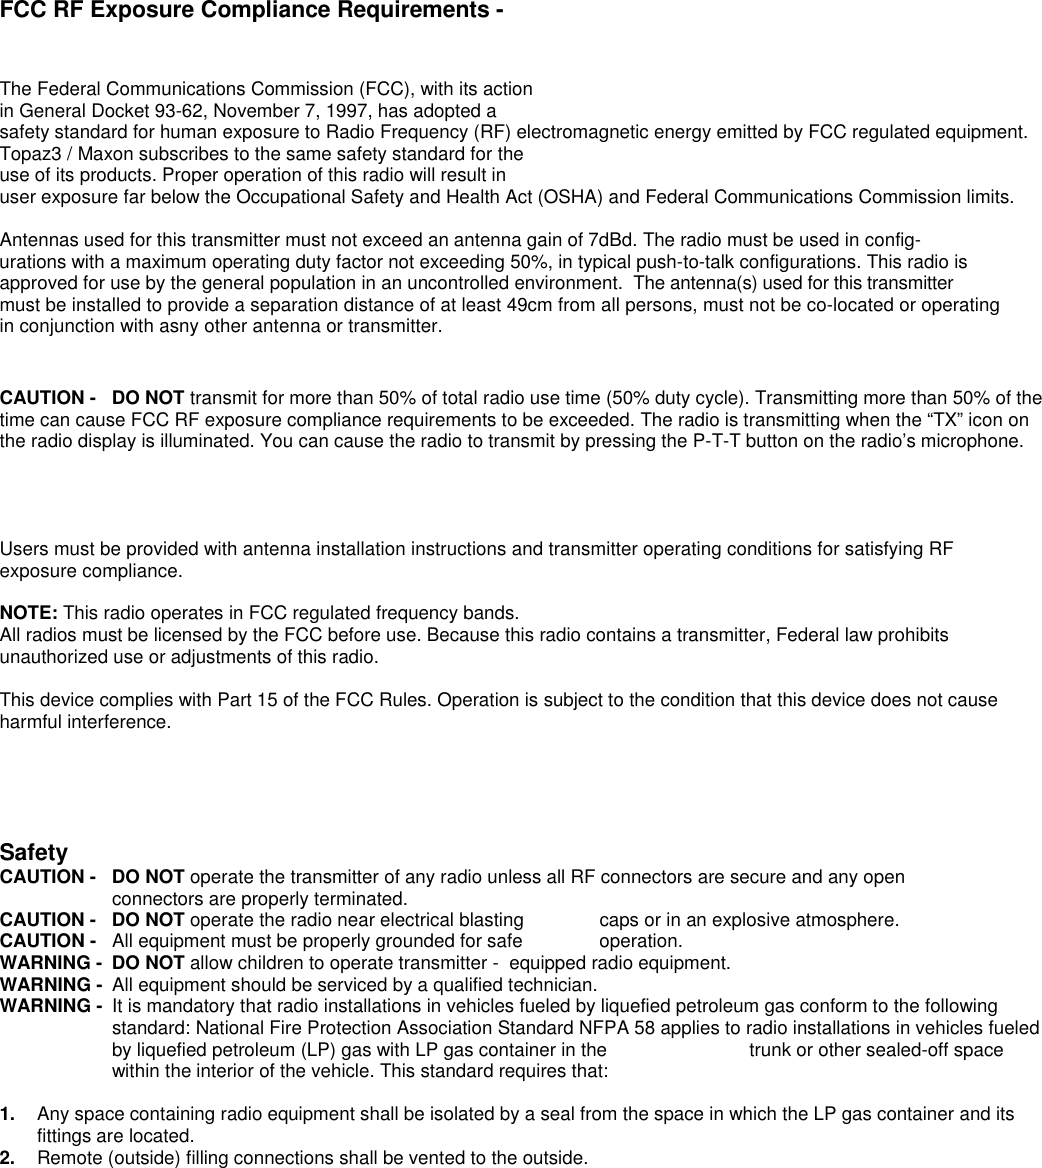 FCC RF Exposure Compliance Requirements -The Federal Communications Commission (FCC), with its actionin General Docket 93-62, November 7, 1997, has adopted asafety standard for human exposure to Radio Frequency (RF) electromagnetic energy emitted by FCC regulated equipment.Topaz3 / Maxon subscribes to the same safety standard for theuse of its products. Proper operation of this radio will result inuser exposure far below the Occupational Safety and Health Act (OSHA) and Federal Communications Commission limits.Antennas used for this transmitter must not exceed an antenna gain of 7dBd. The radio must be used in config-urations with a maximum operating duty factor not exceeding 50%, in typical push-to-talk configurations. This radio is approved for use by the general population in an uncontrolled environment.  The antenna(s) used for this transmittermust be installed to provide a separation distance of at least 49cm from all persons, must not be co-located or operating in conjunction with asny other antenna or transmitter.  CAUTION - DO NOT transmit for more than 50% of total radio use time (50% duty cycle). Transmitting more than 50% of thetime can cause FCC RF exposure compliance requirements to be exceeded. The radio is transmitting when the “TX” icon onthe radio display is illuminated. You can cause the radio to transmit by pressing the P-T-T button on the radio’s microphone.   Users must be provided with antenna installation instructions and transmitter operating conditions for satisfying RFexposure compliance.NOTE: This radio operates in FCC regulated frequency bands.All radios must be licensed by the FCC before use. Because this radio contains a transmitter, Federal law prohibitsunauthorized use or adjustments of this radio.This device complies with Part 15 of the FCC Rules. Operation is subject to the condition that this device does not causeharmful interference.SafetyCAUTION -  DO NOT operate the transmitter of any radio unless all RF connectors are secure and any open connectors are properly terminated.CAUTION -  DO NOT operate the radio near electrical blasting  caps or in an explosive atmosphere.CAUTION -  All equipment must be properly grounded for safe  operation.WARNING -  DO NOT allow children to operate transmitter -  equipped radio equipment.WARNING -  All equipment should be serviced by a qualified technician.WARNING -  It is mandatory that radio installations in vehicles fueled by liquefied petroleum gas conform to the followingstandard: National Fire Protection Association Standard NFPA 58 applies to radio installations in vehicles fueledby liquefied petroleum (LP) gas with LP gas container in the  trunk or other sealed-off spacewithin the interior of the vehicle. This standard requires that:1.  Any space containing radio equipment shall be isolated by a seal from the space in which the LP gas container and itsfittings are located.2.  Remote (outside) filling connections shall be vented to the outside.